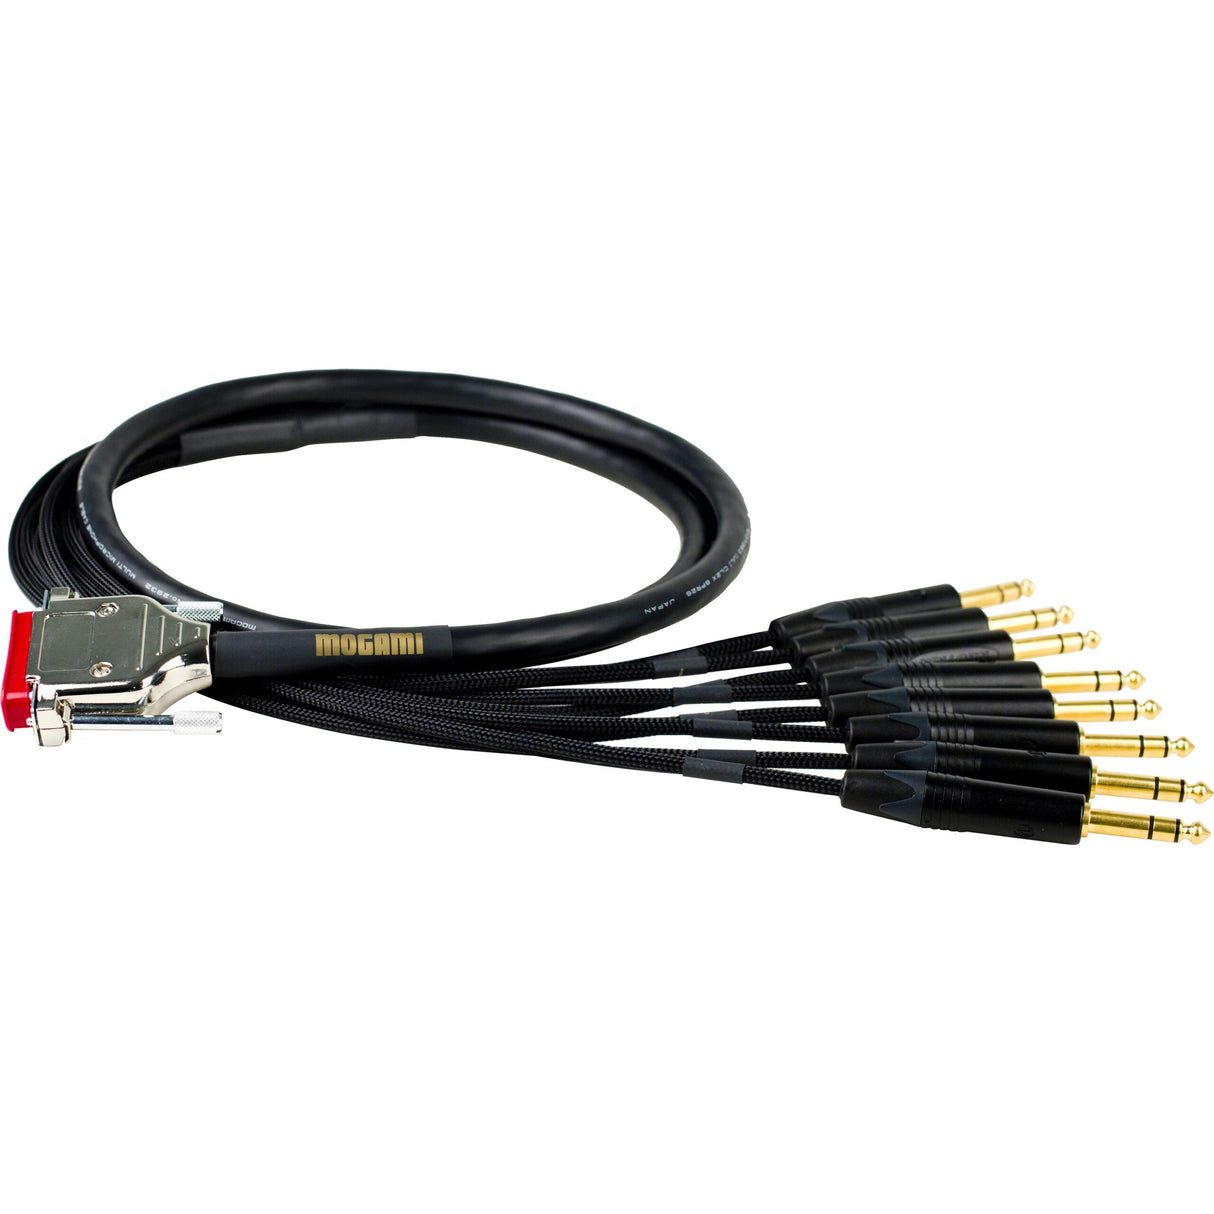 Mogami GOLD DB25-TRS-03 8-Channel Gold DB25 to TRS Male Analog Interface Cable, 3-Feet